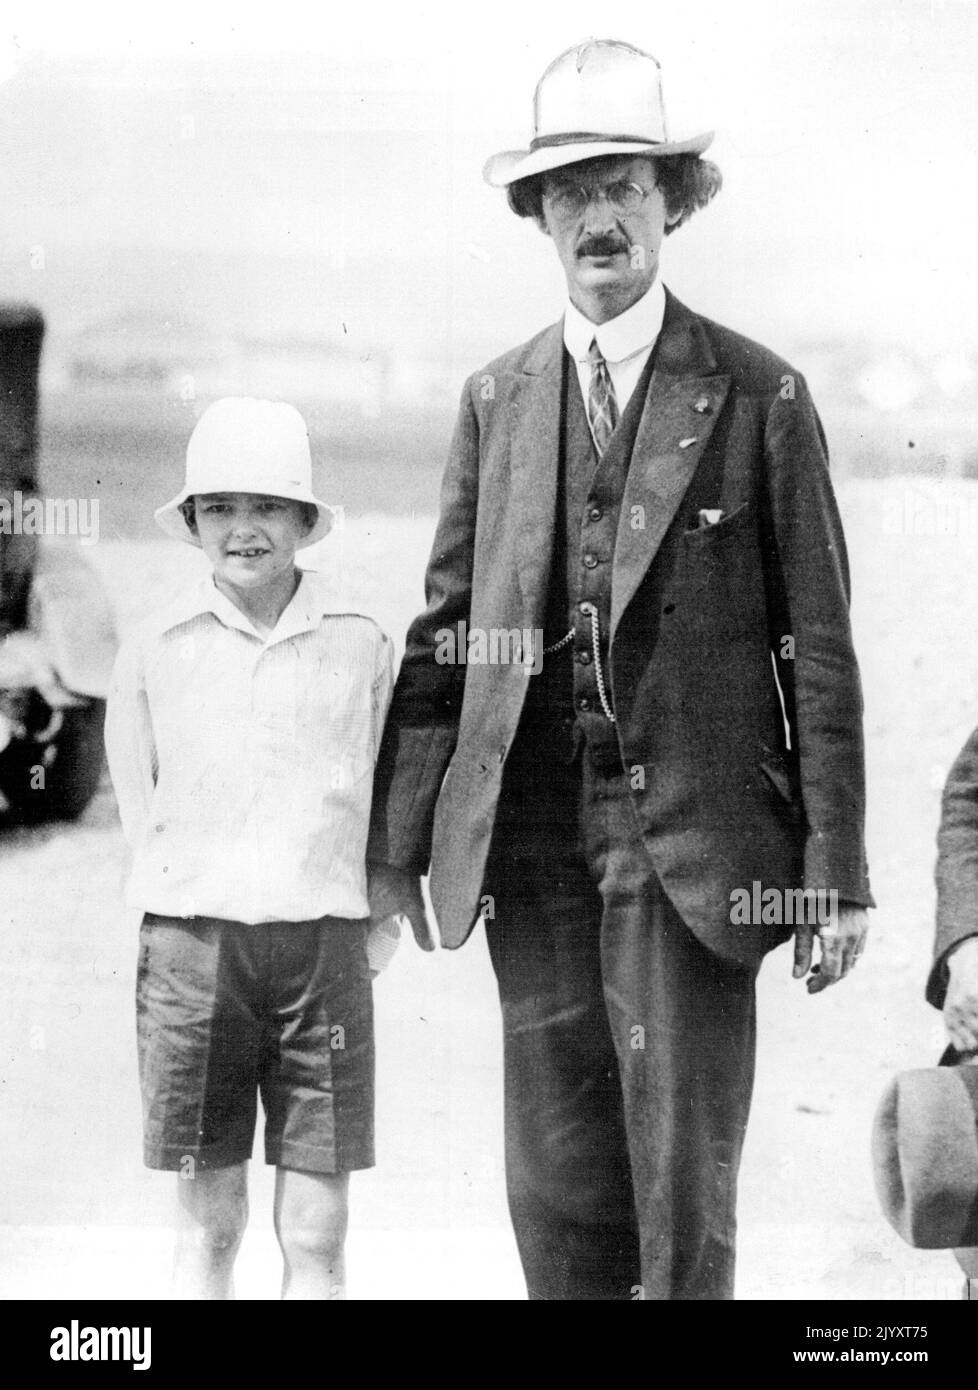 Professor Piccard Ready -- Professor Piccard with his son the airfield at Zurich. Professor Piccard is at Zurich, Switzerland and plans to make his new ascent into the stratosphere today August 10. He goes with a companion to collect more scientific data. September 26, 1932. (Photo by Associated Press Photo). Stock Photo